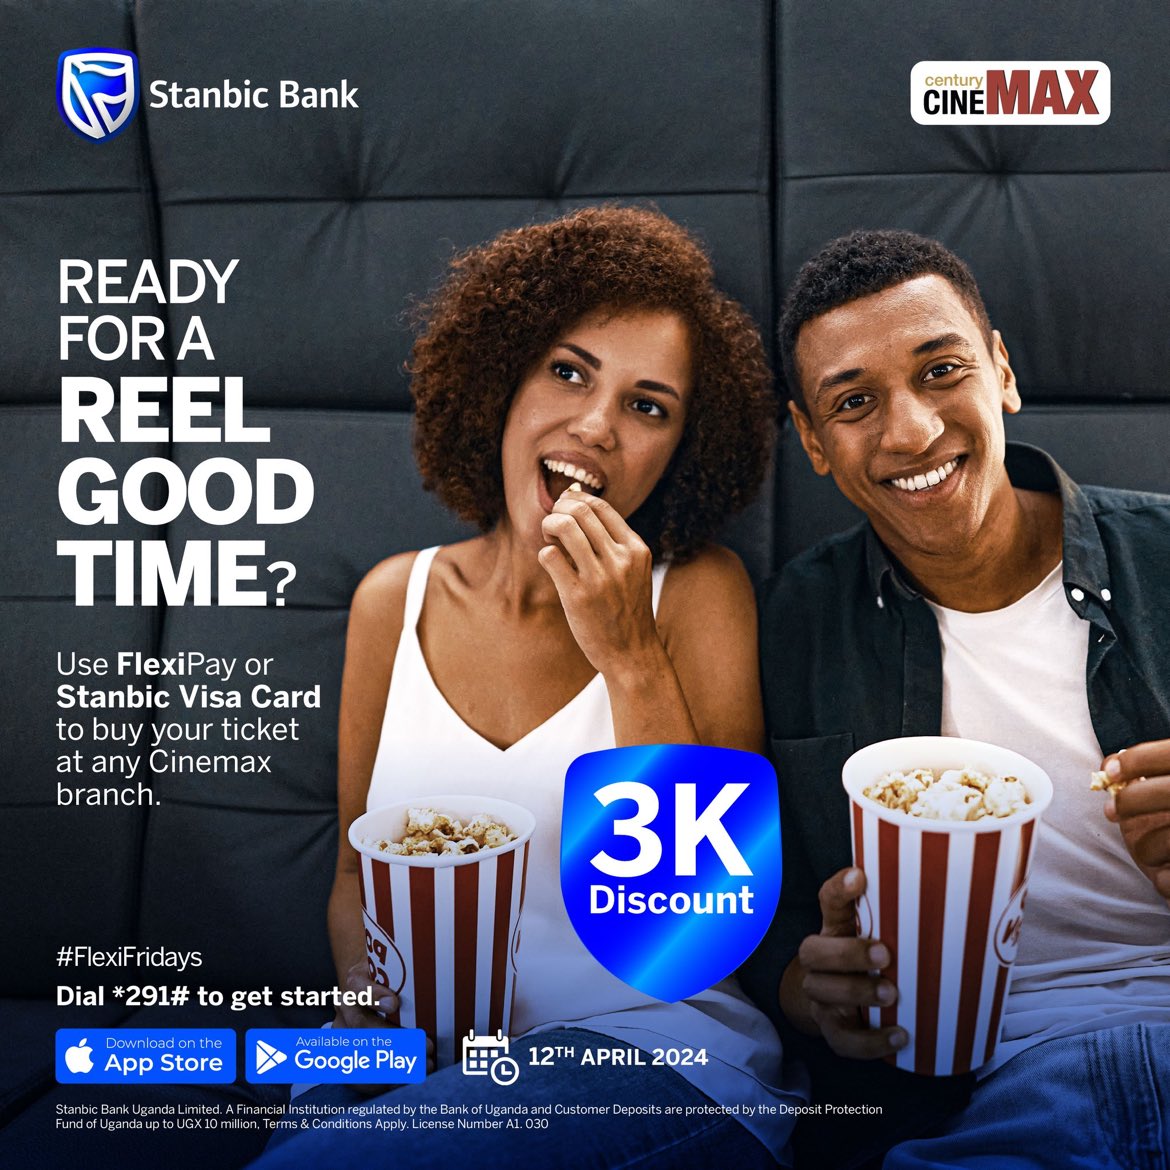 Today, all @cinemaxug locations have a special offer. Buy your tickets with Flexipay or Stanbic Visa Cards to get a UGX 3000 discount. Don't miss this great offer. Come and enjoy #FlexiFridays and see the savings for yourself.